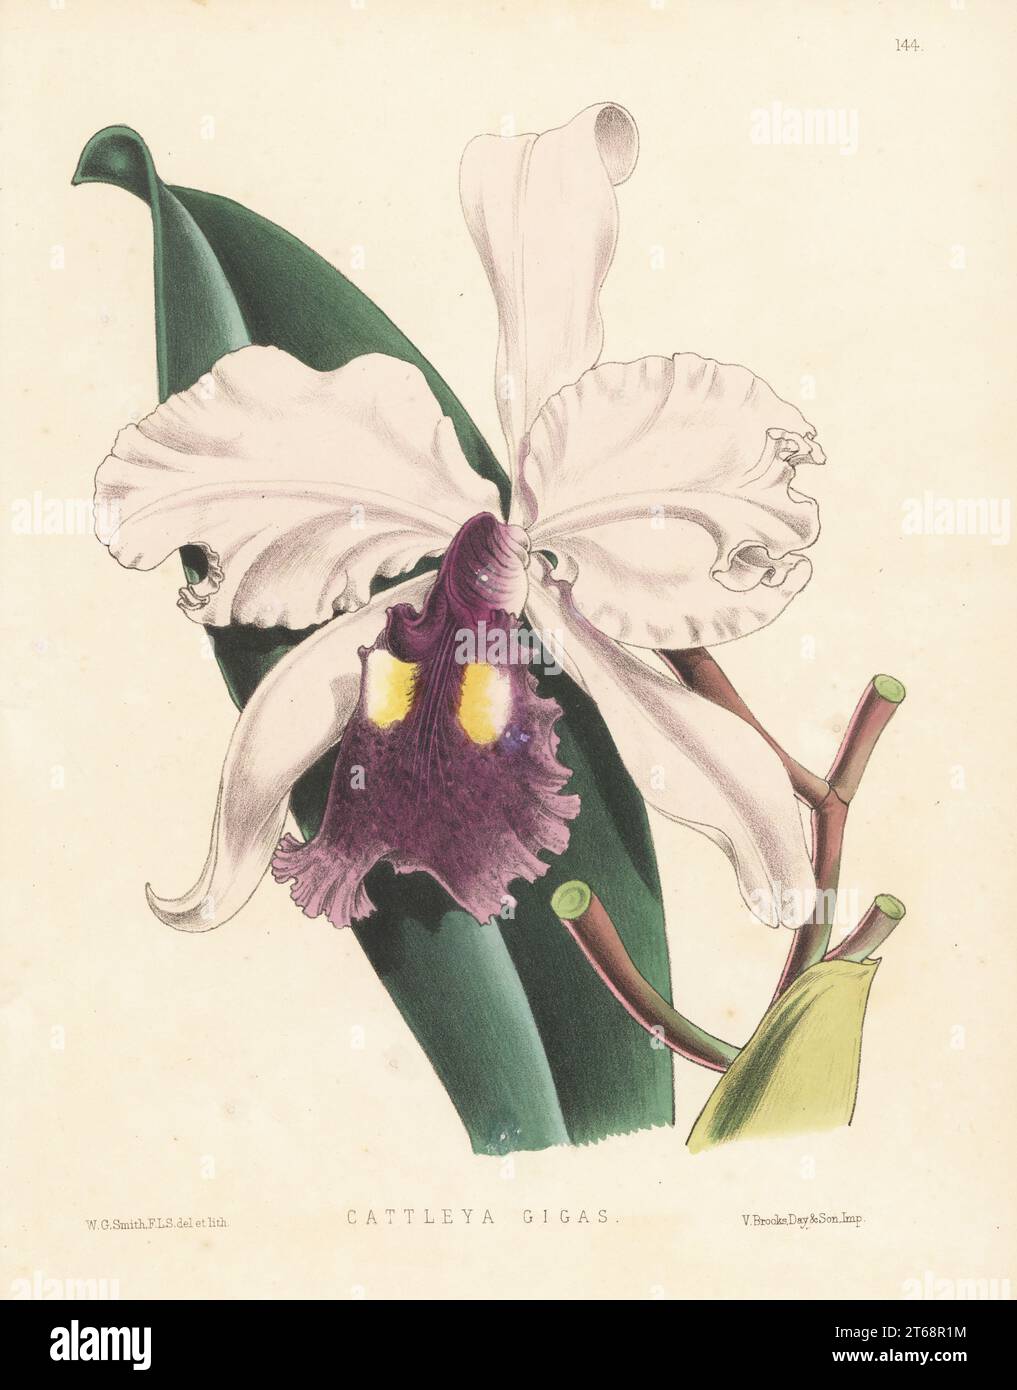 Warscewicz's Cattley's orchid, Cattleya warscewiczii. Sketched from a plant in Lord Londesborough'ts collection at Norbiton. First collected by Polish botanist Jozef Warszewicz in Colombia in 1848-49 and formally described by Heinrich Gustav Reichenbach in 1855. As Cattleya gigas. Handcolored botanical illustration drawn and lithographed by Worthington George Smith from Henry Honywood Dombrain's Floral Magazine, New Series, Volume 3, L. Reeve, London, 1874. Lithograph printed by Vincent Brooks, Day & Son. Stock Photo